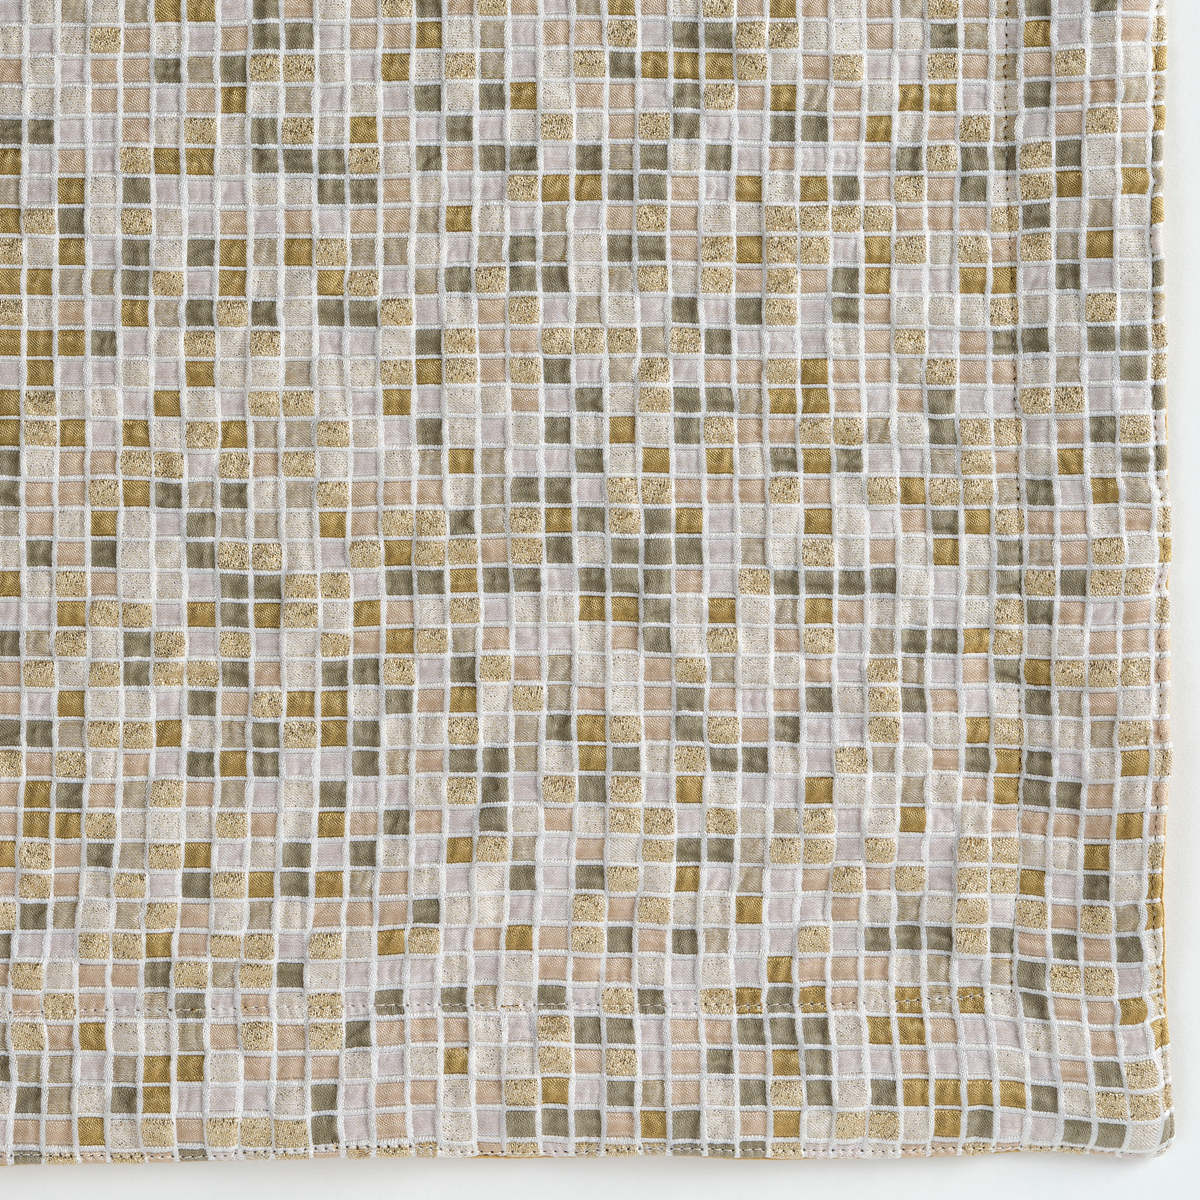 Swatch Sample of Celso de Lemos Mosaic Collection in Miel Color